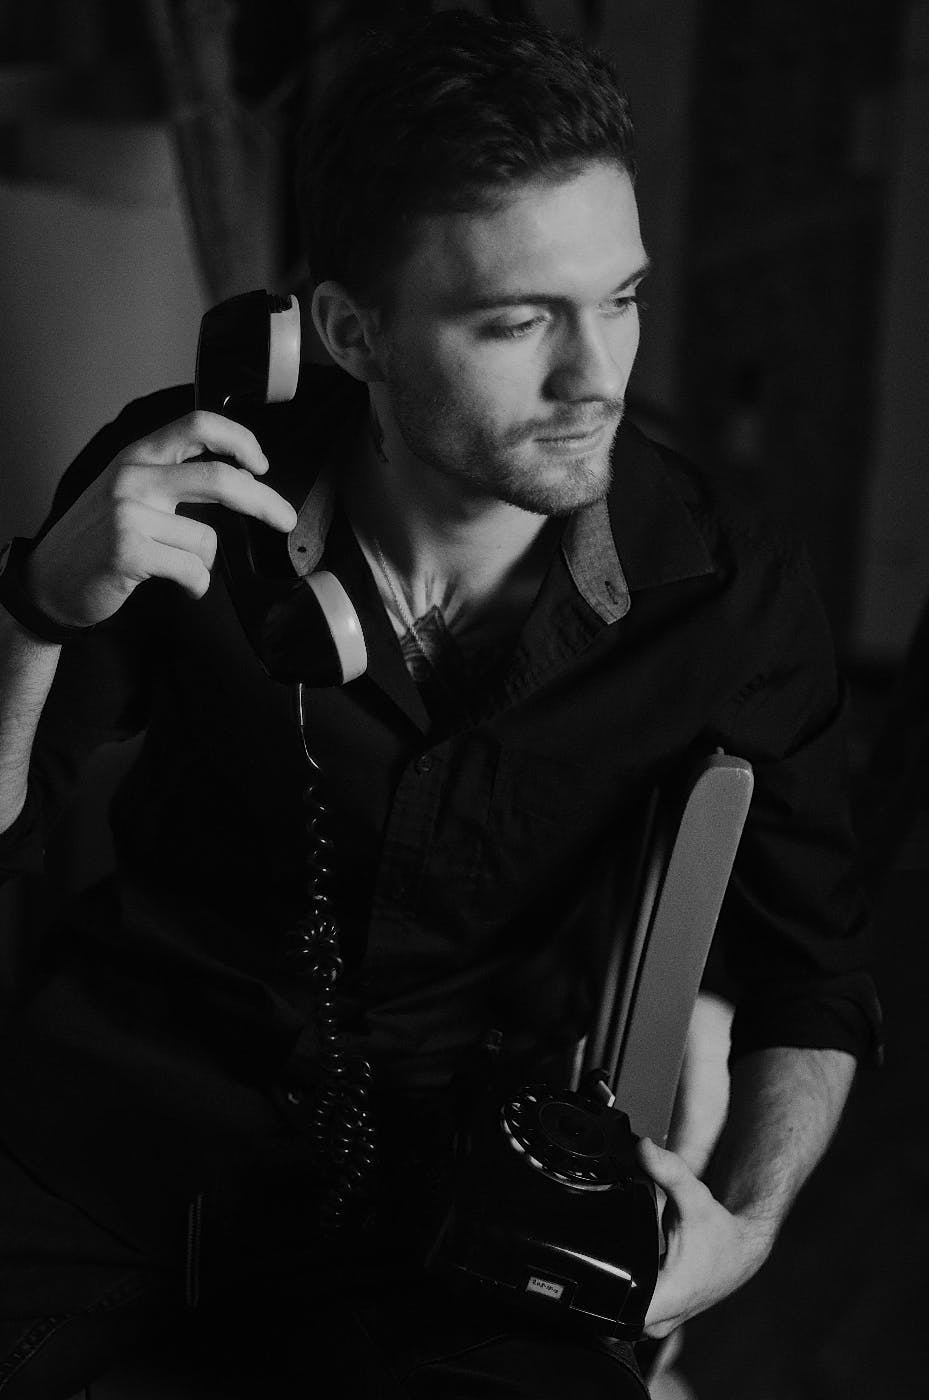 Black and white photo of a young man sitting in a chair using a rotary phone